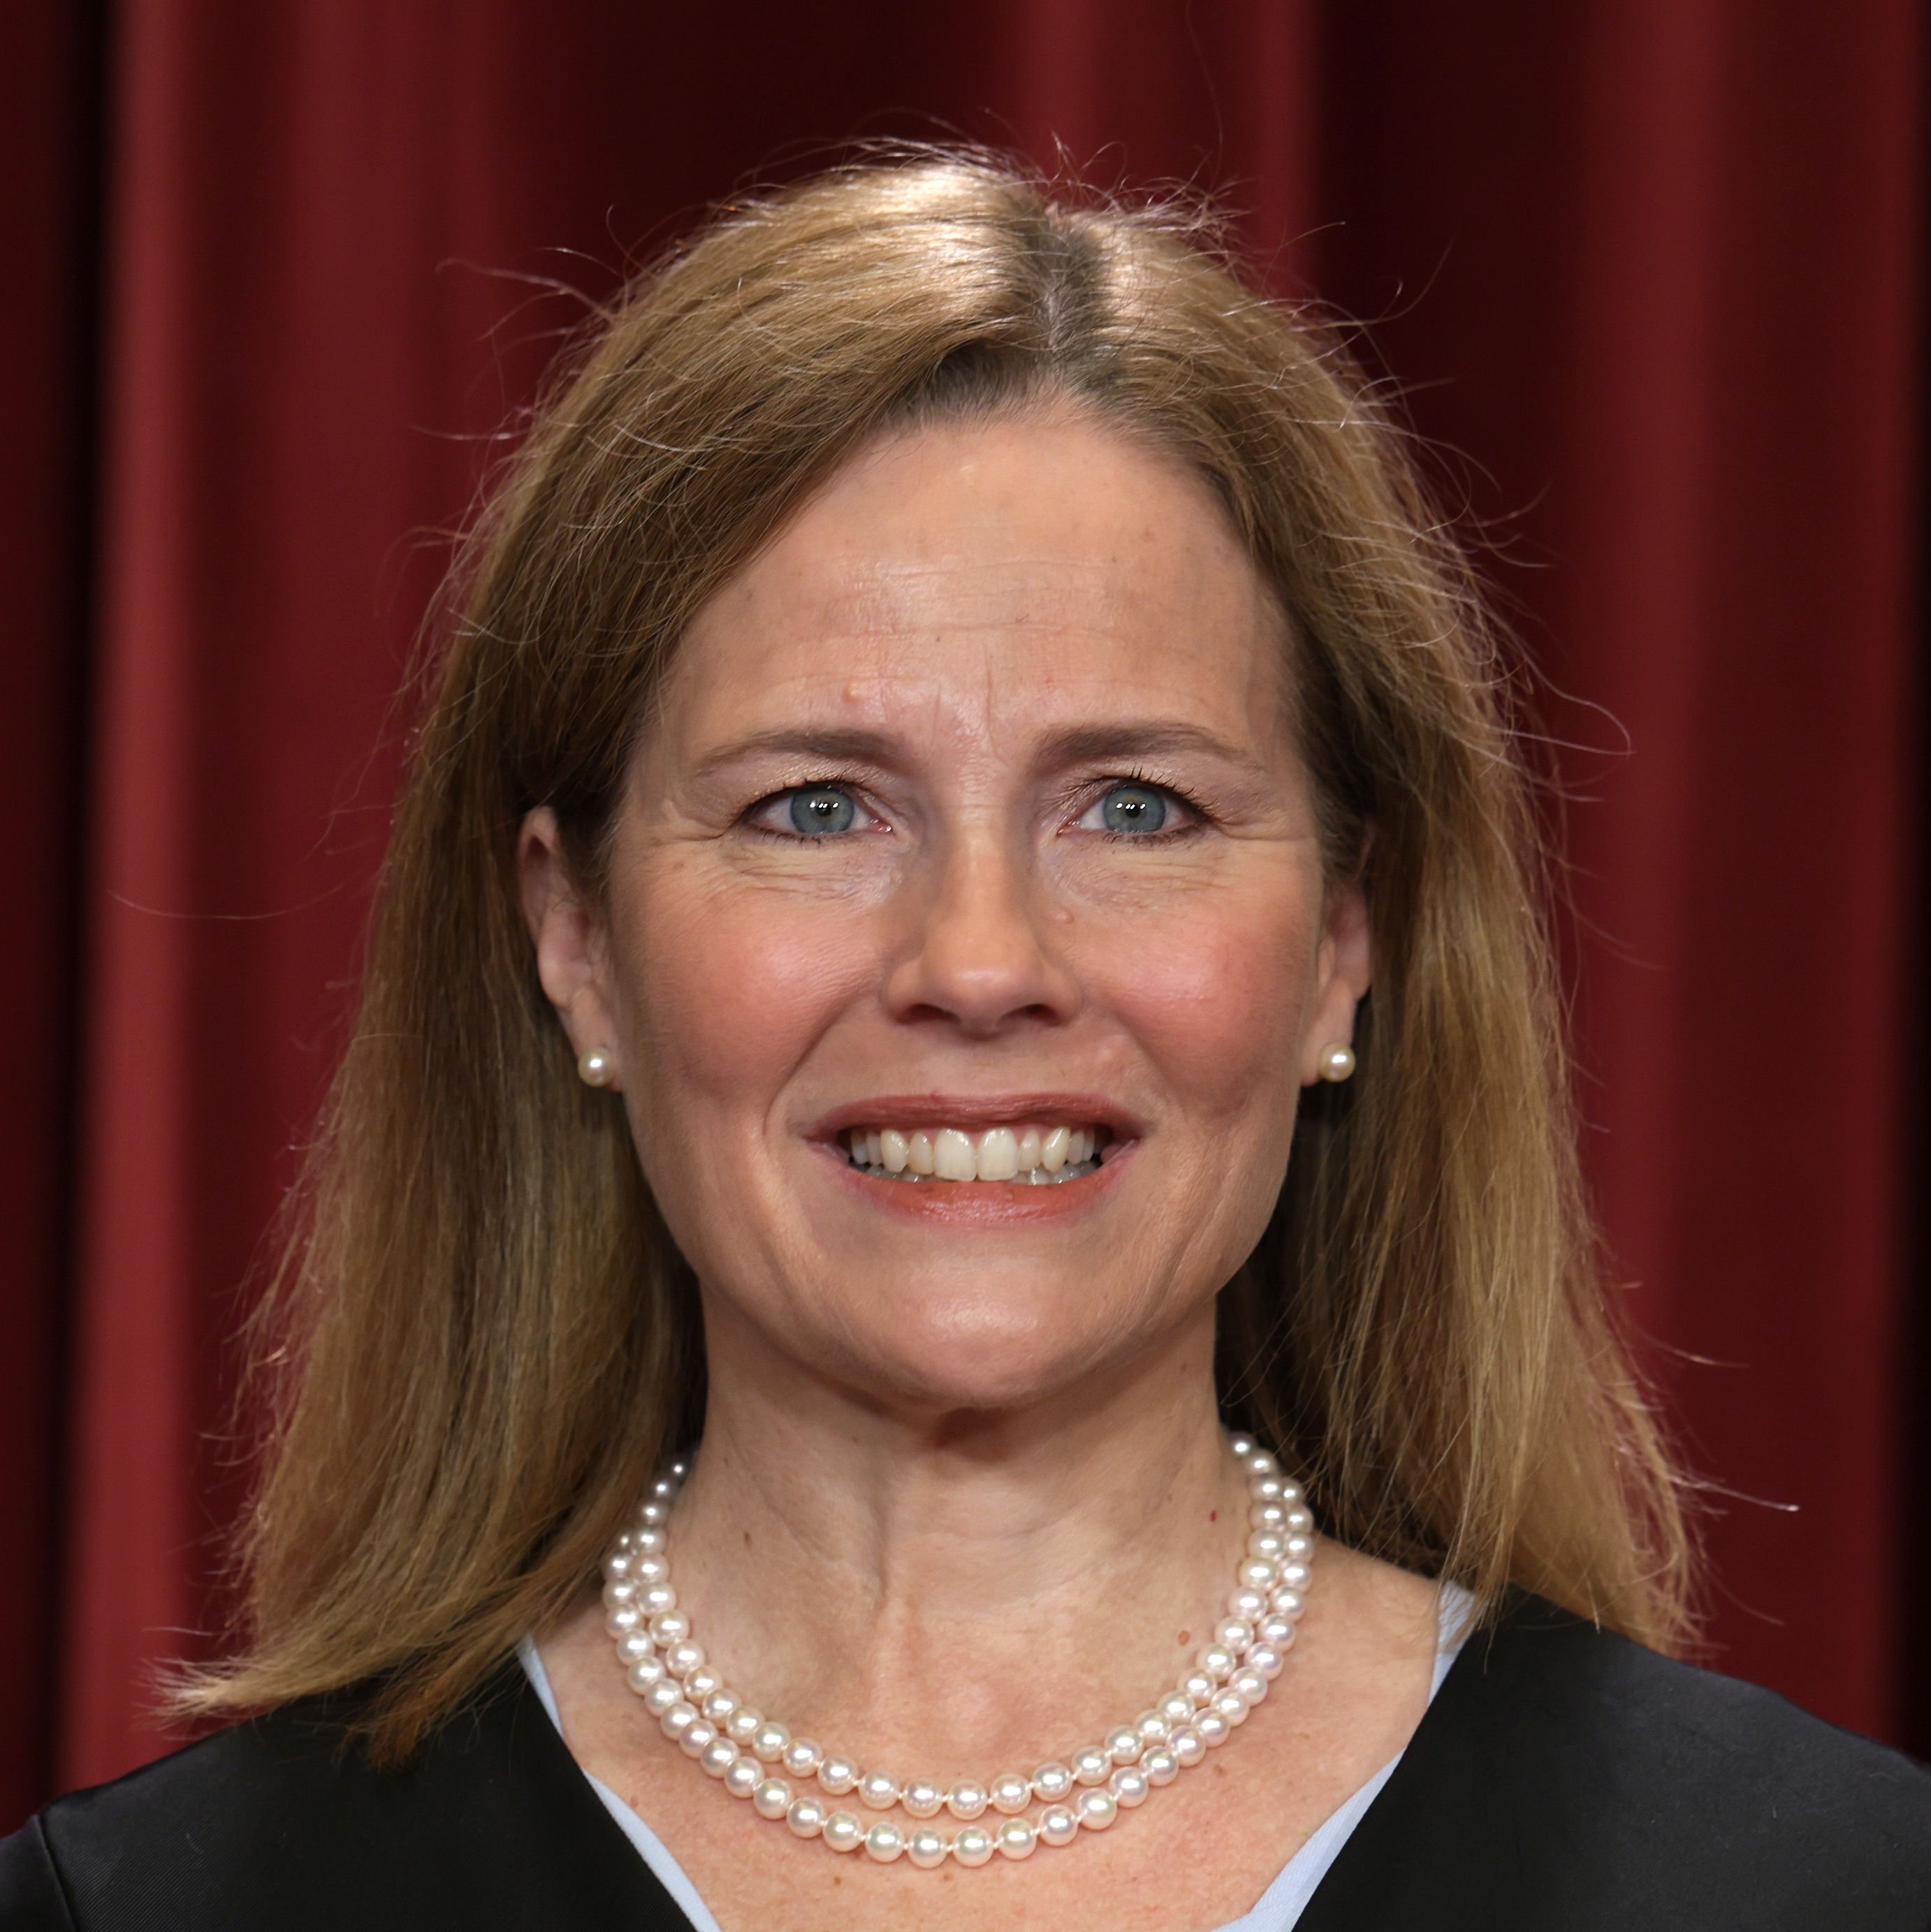 I Hate to Harsh Anyone's Mellow, but Justice Amy Coney Barrett Is Not Some Kind of Hero